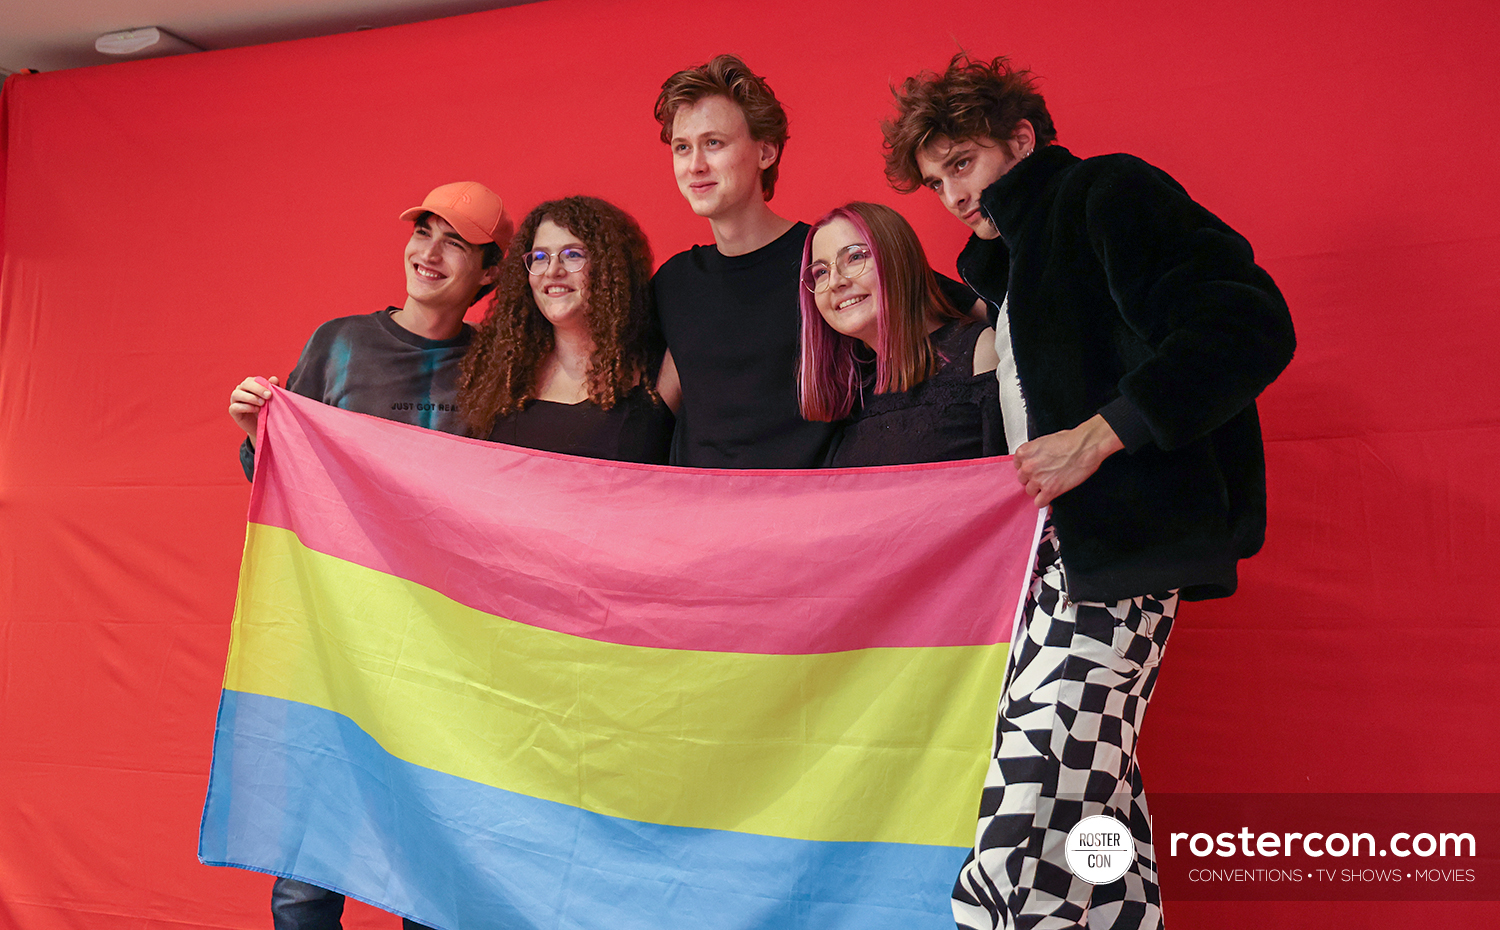 Rocco Fasano, Henrik Holm & Maxence Danet-Fauvel - Photoshoot - Skam - Everything is Love 5